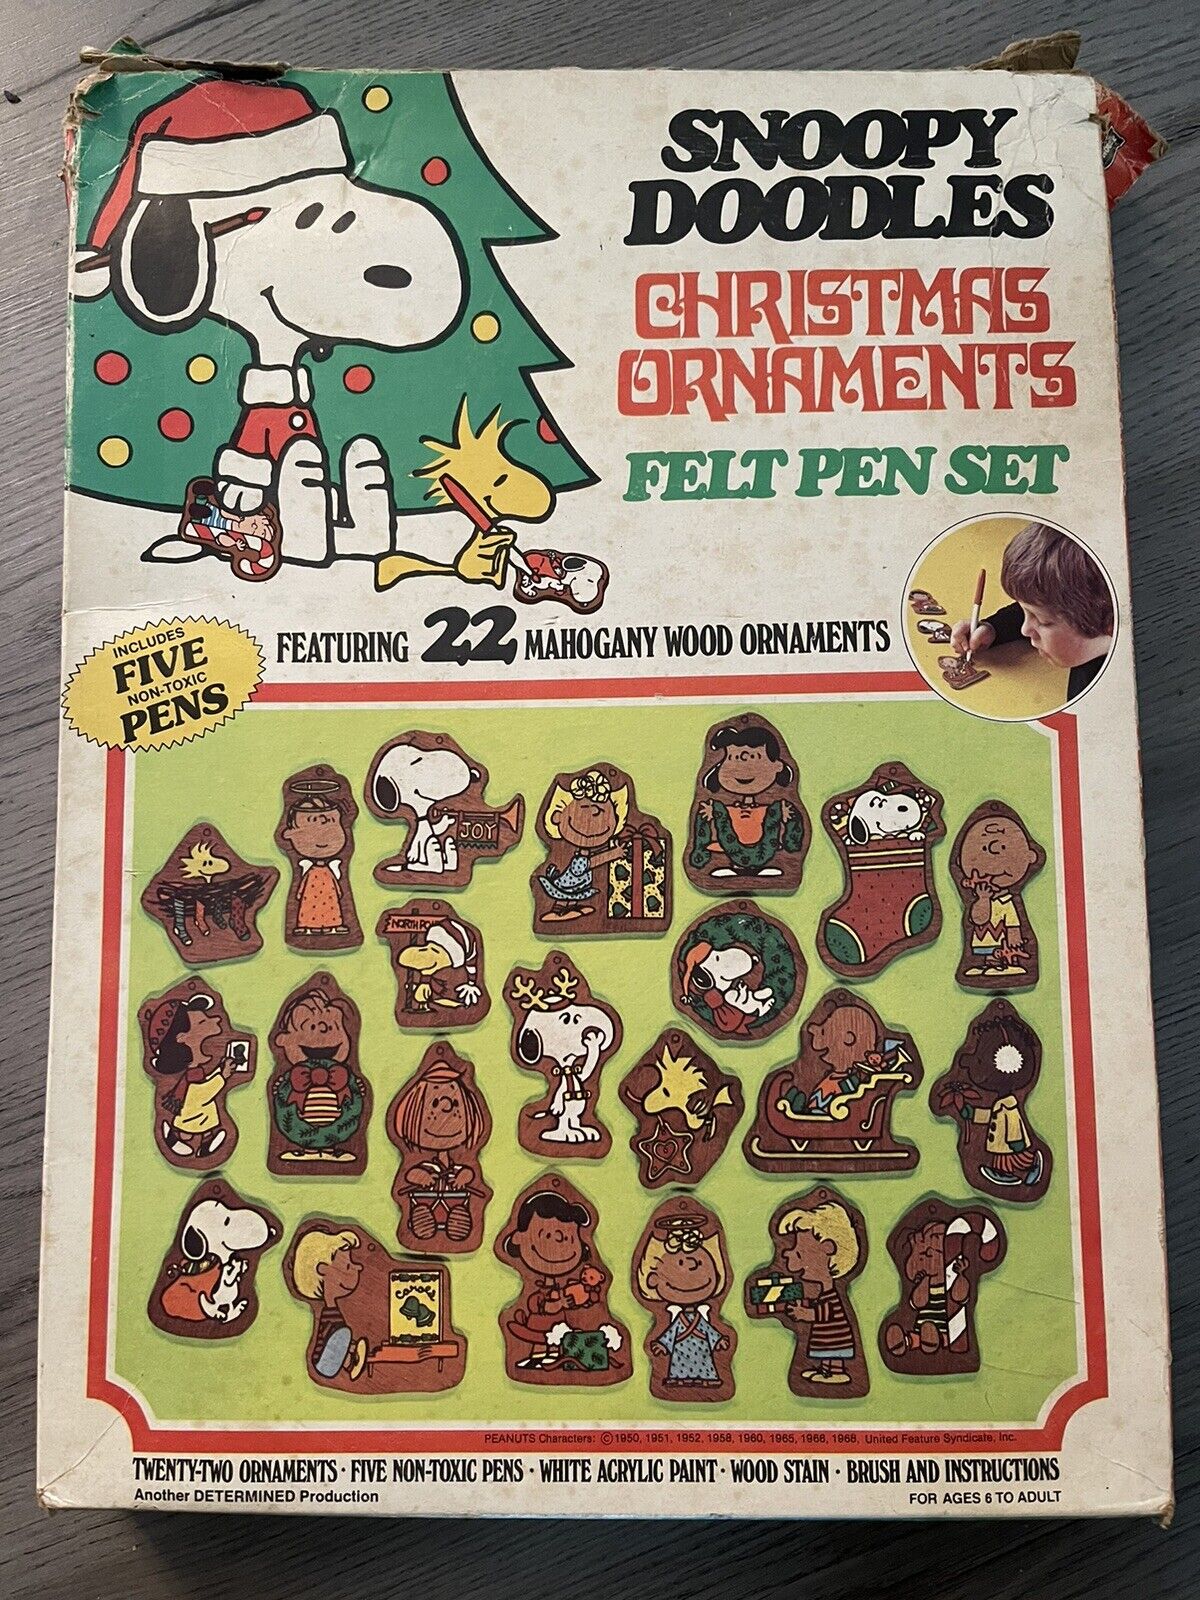 Vintage 1968 Snoopy Doodles Christmas Ornaments Set Arts And Crafts Painting